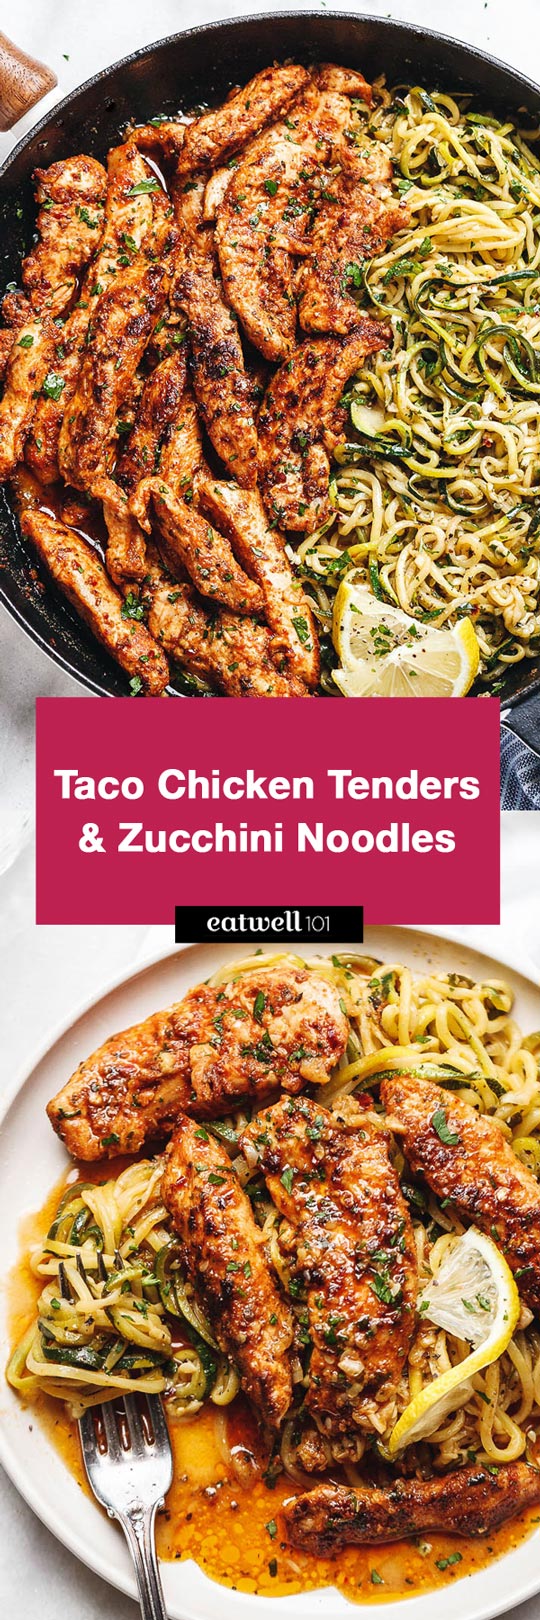 Taco Chicken Tenders with Lemon Zucchini Noodles - #eatwell101 #recipe #keto #paleo #lowcarb #glutenfree - Incredibly flavorful and juicy Taco Chicken Bites are a perfect dinner for the busiest of weeknights.